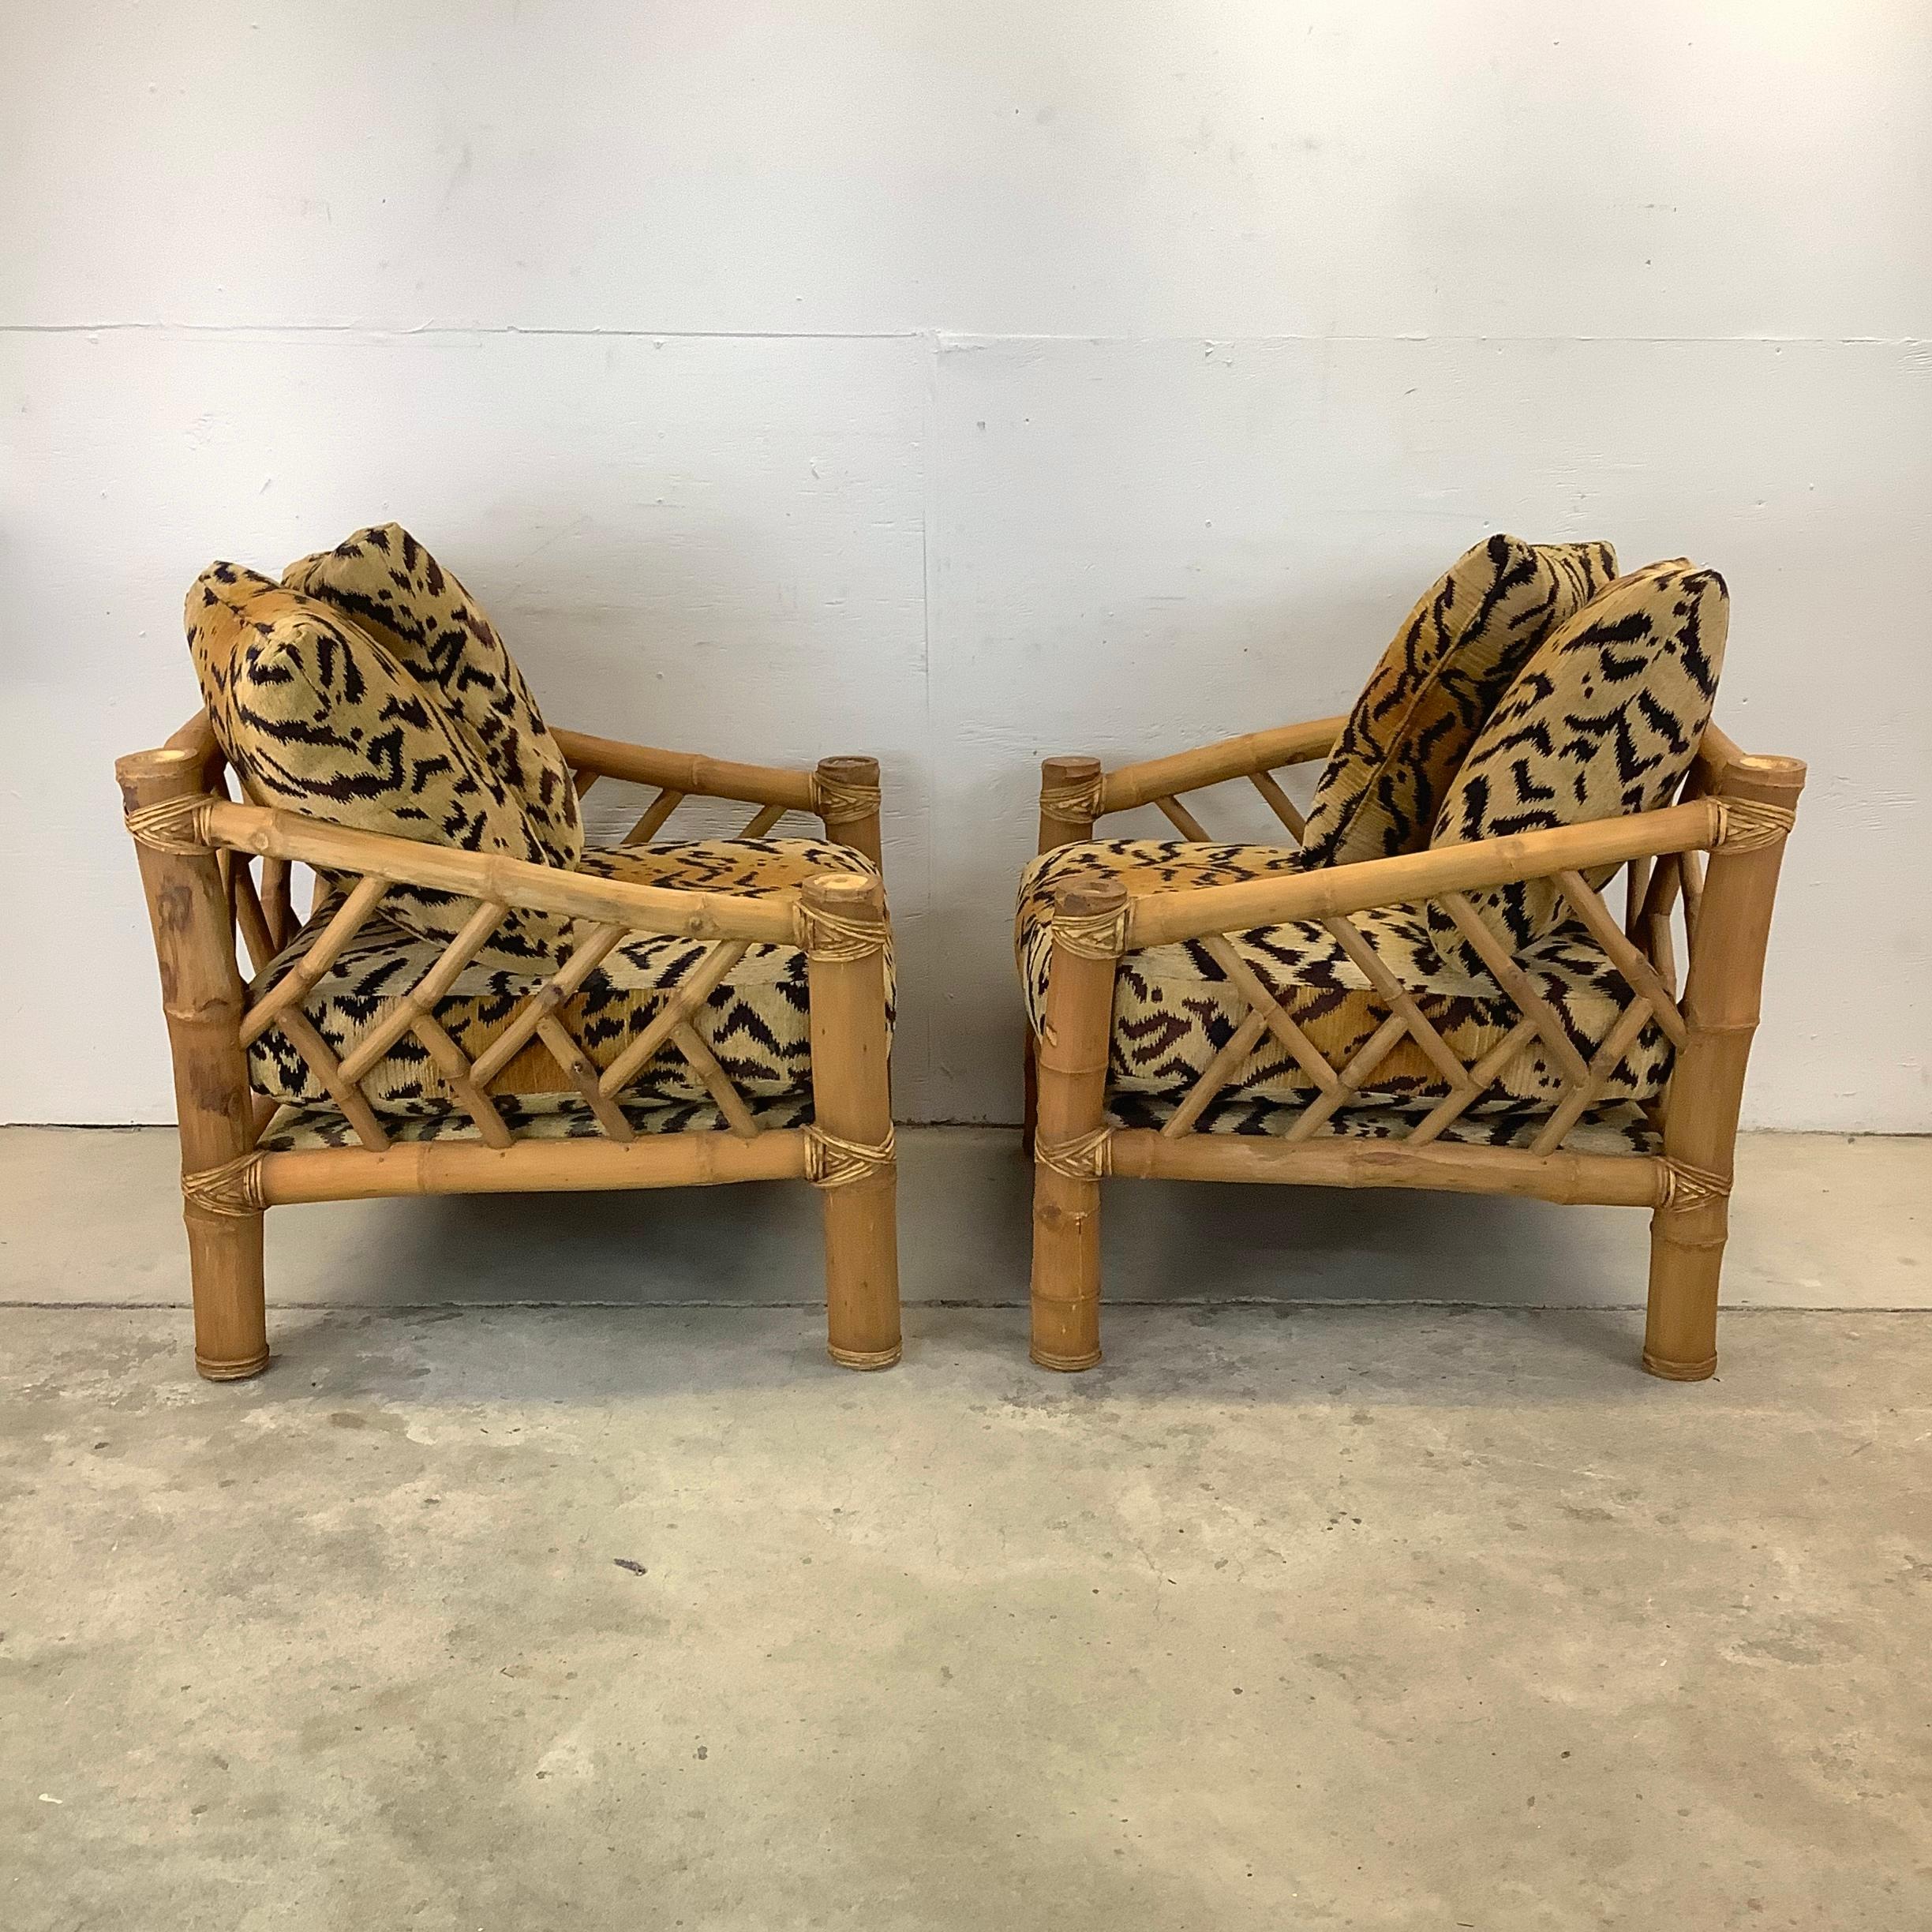 Upholstery Pair Vintage Bamboo Armchairs & Ottoman in Tiger Print For Sale